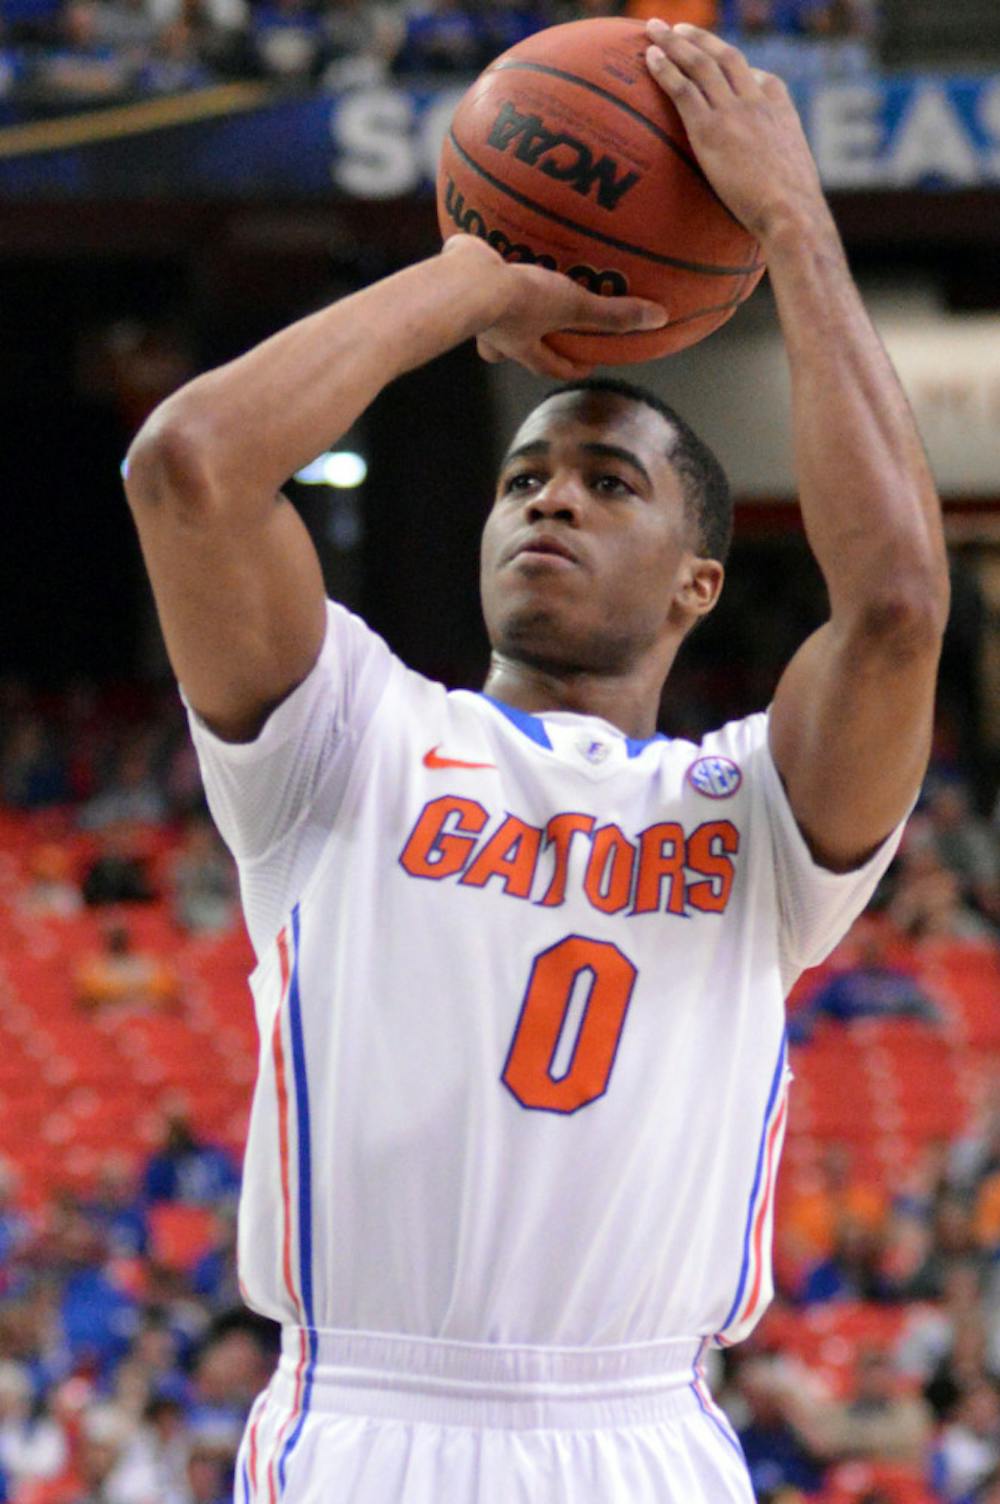 <p>Kasey Hill attempts a free throw during Florida's 56-49 win against Tennessee on Saturday in the Georgia Dome. Hill scored all five of the Gators' points off the bench against the Volunteers.</p>